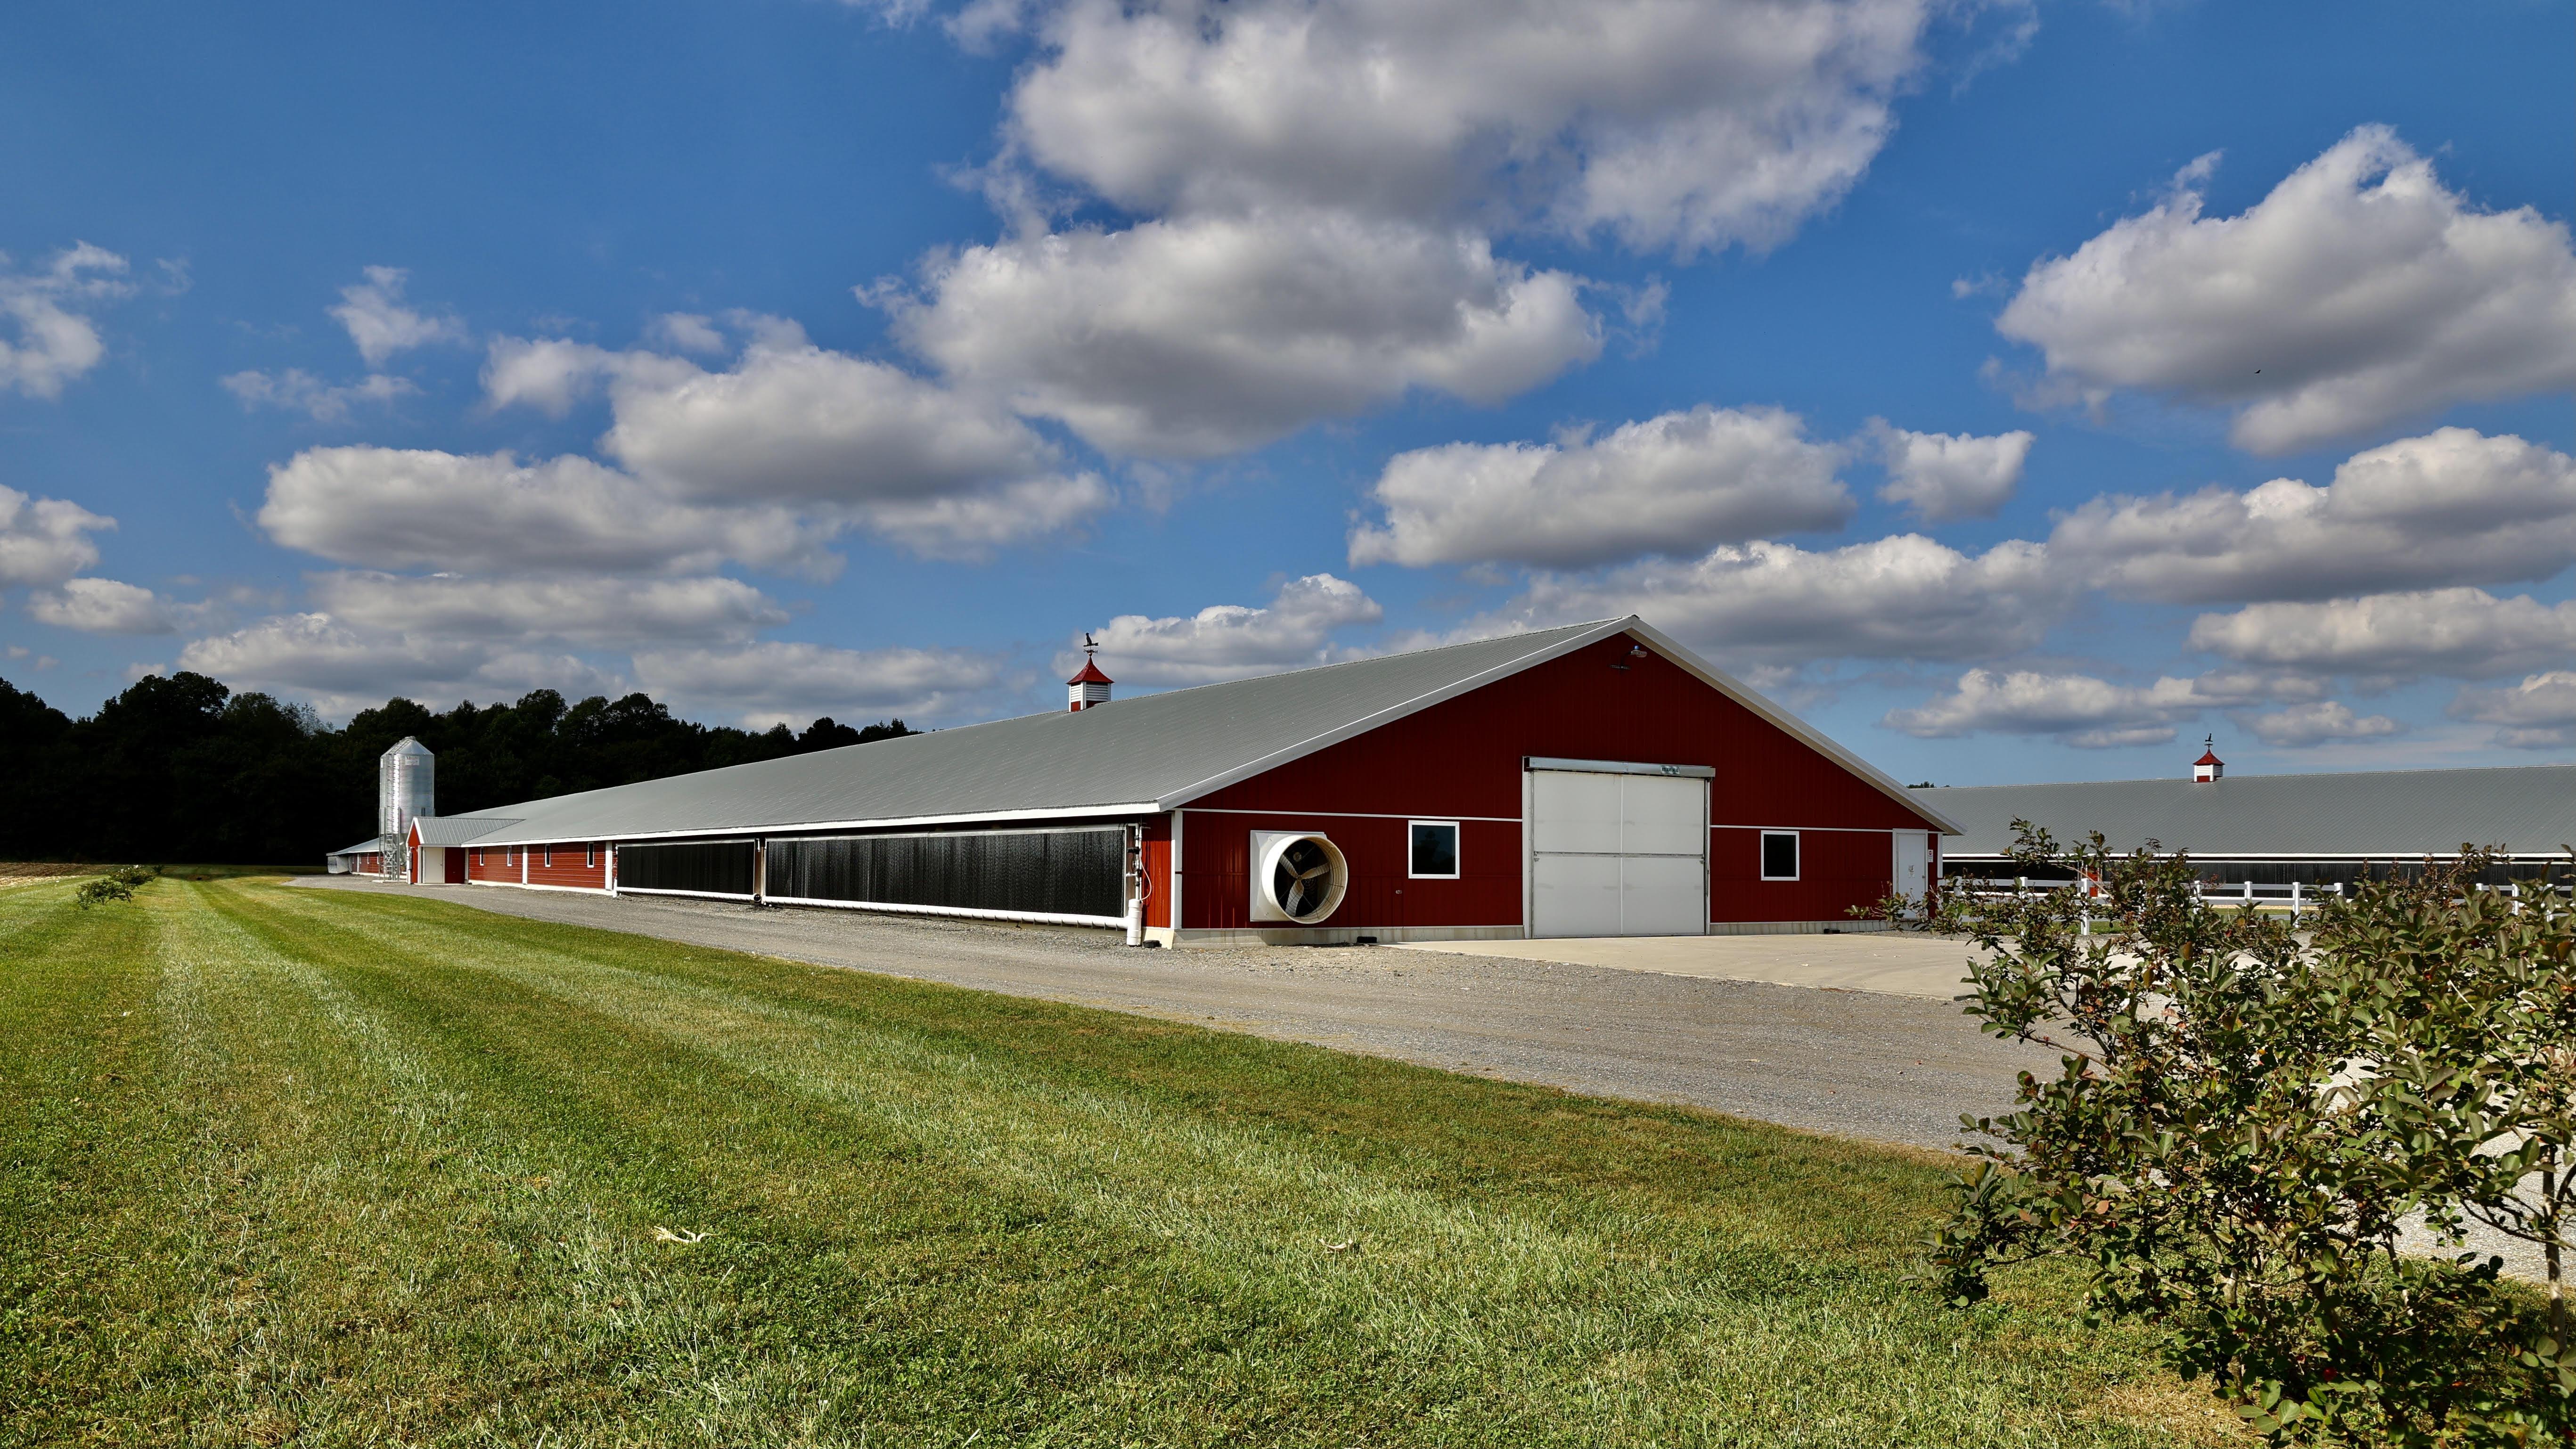 Commercial Poultry Farm by J. Moyle